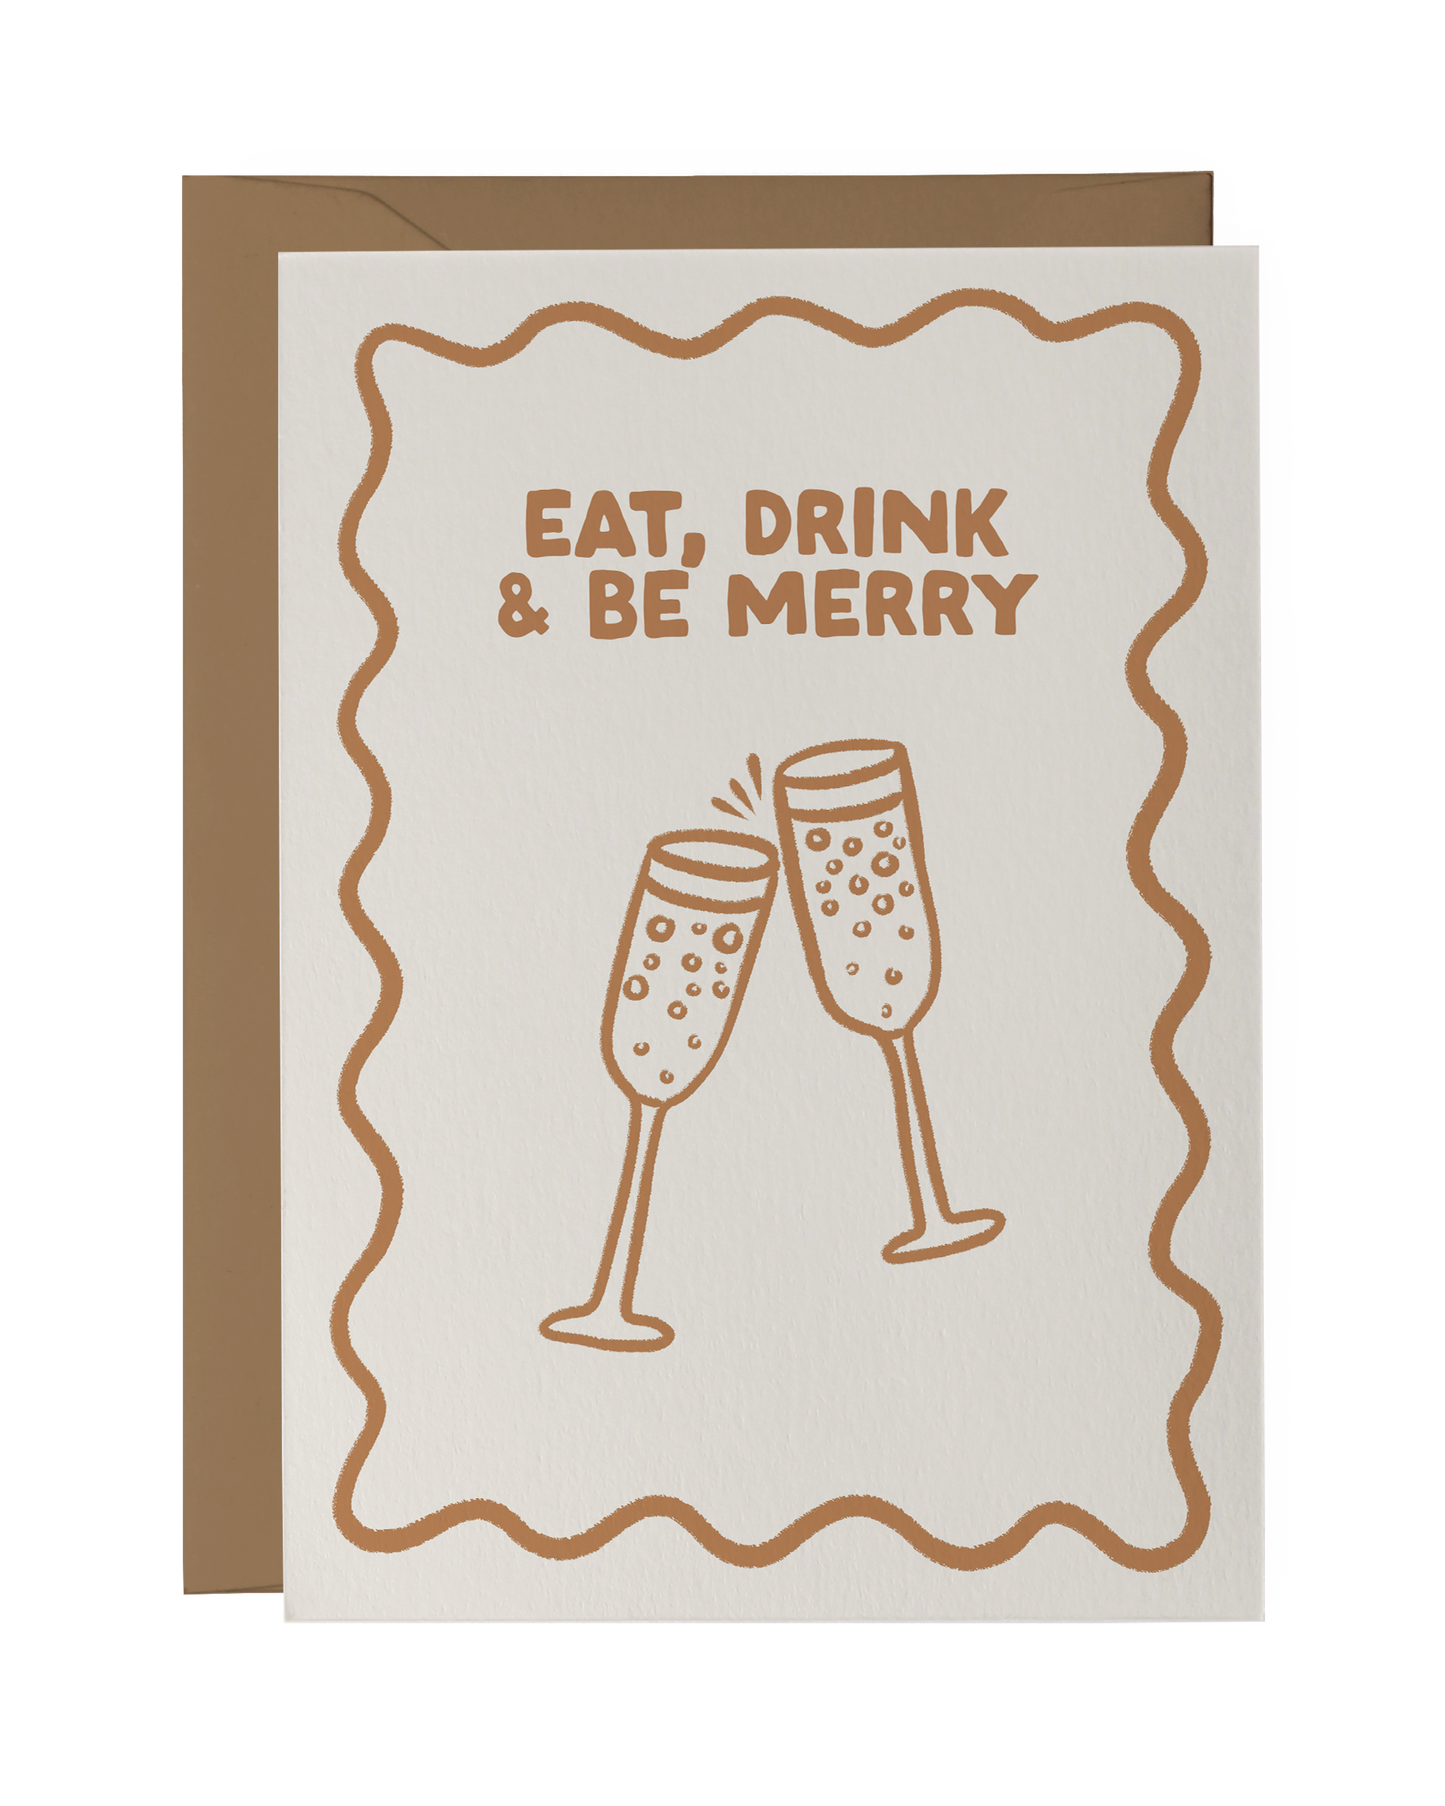 Eat, Drink & Be Merry